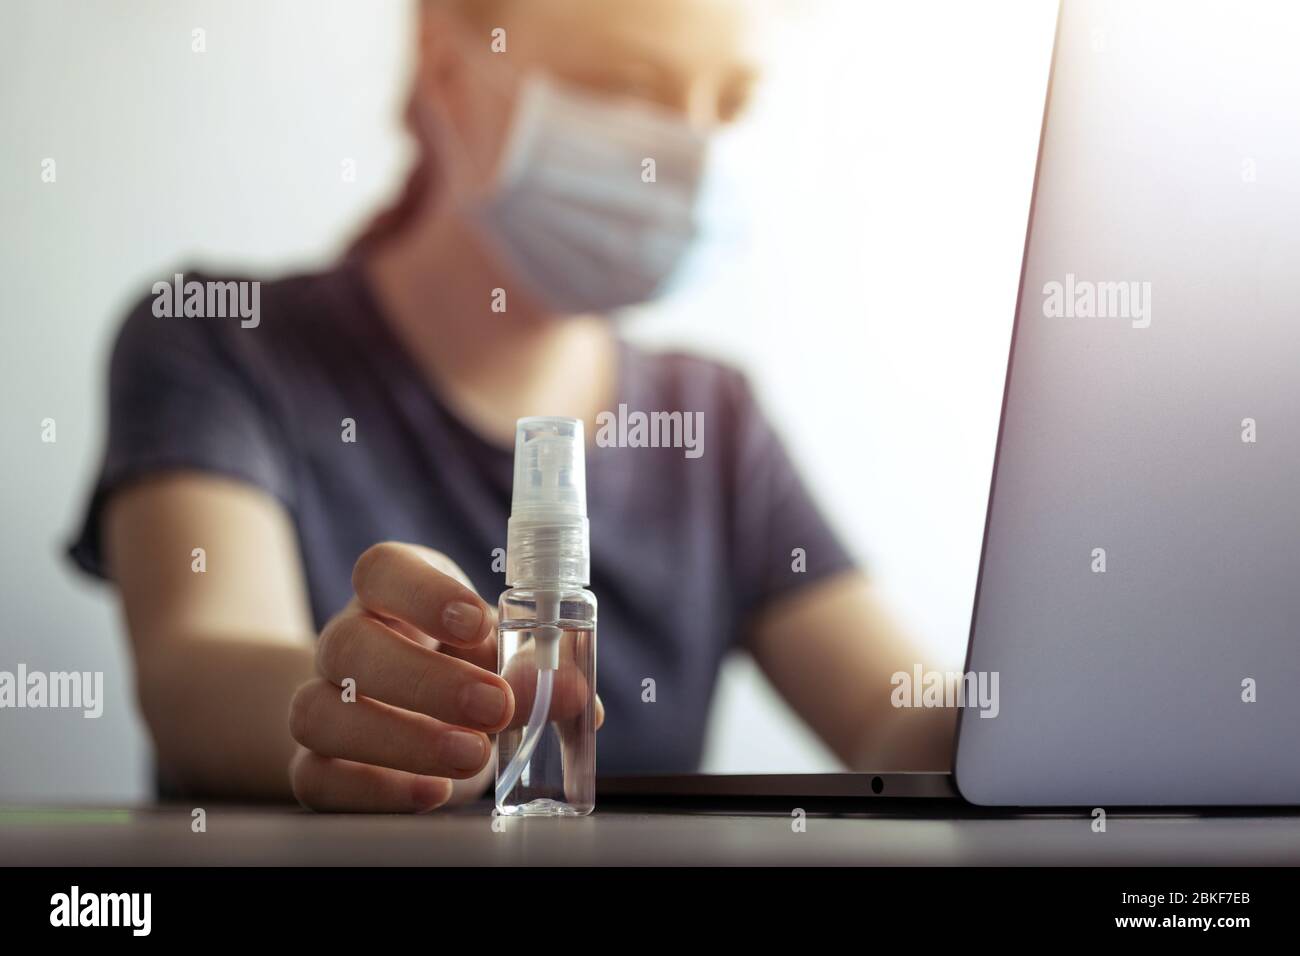 Woman in mask and hand with sanitizer alcohol bottle near laptop. Coronavirus covid-19 prevention at workplace or home during quarantine Stock Photo